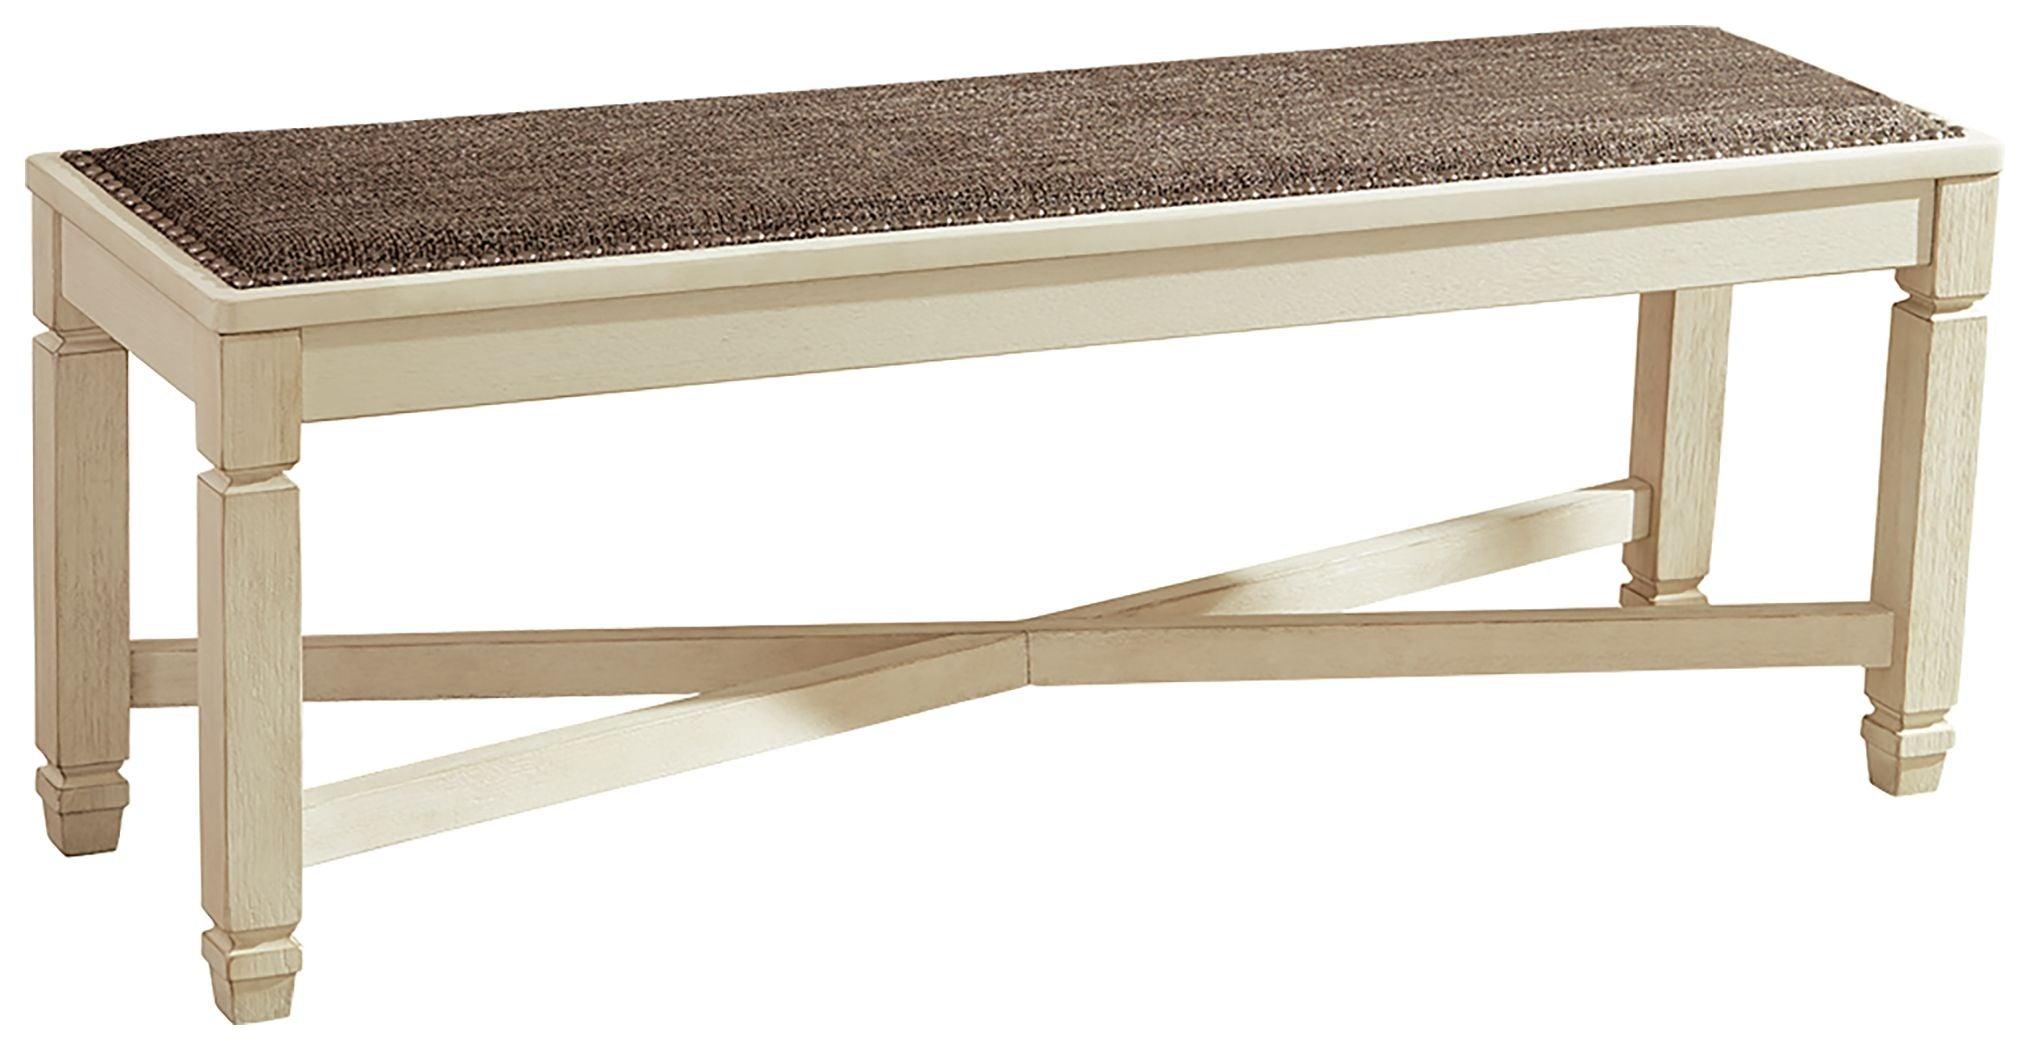 Signature Design by Ashley® - Bolanburg - Beige - Large Uph Dining Room Bench - 5th Avenue Furniture